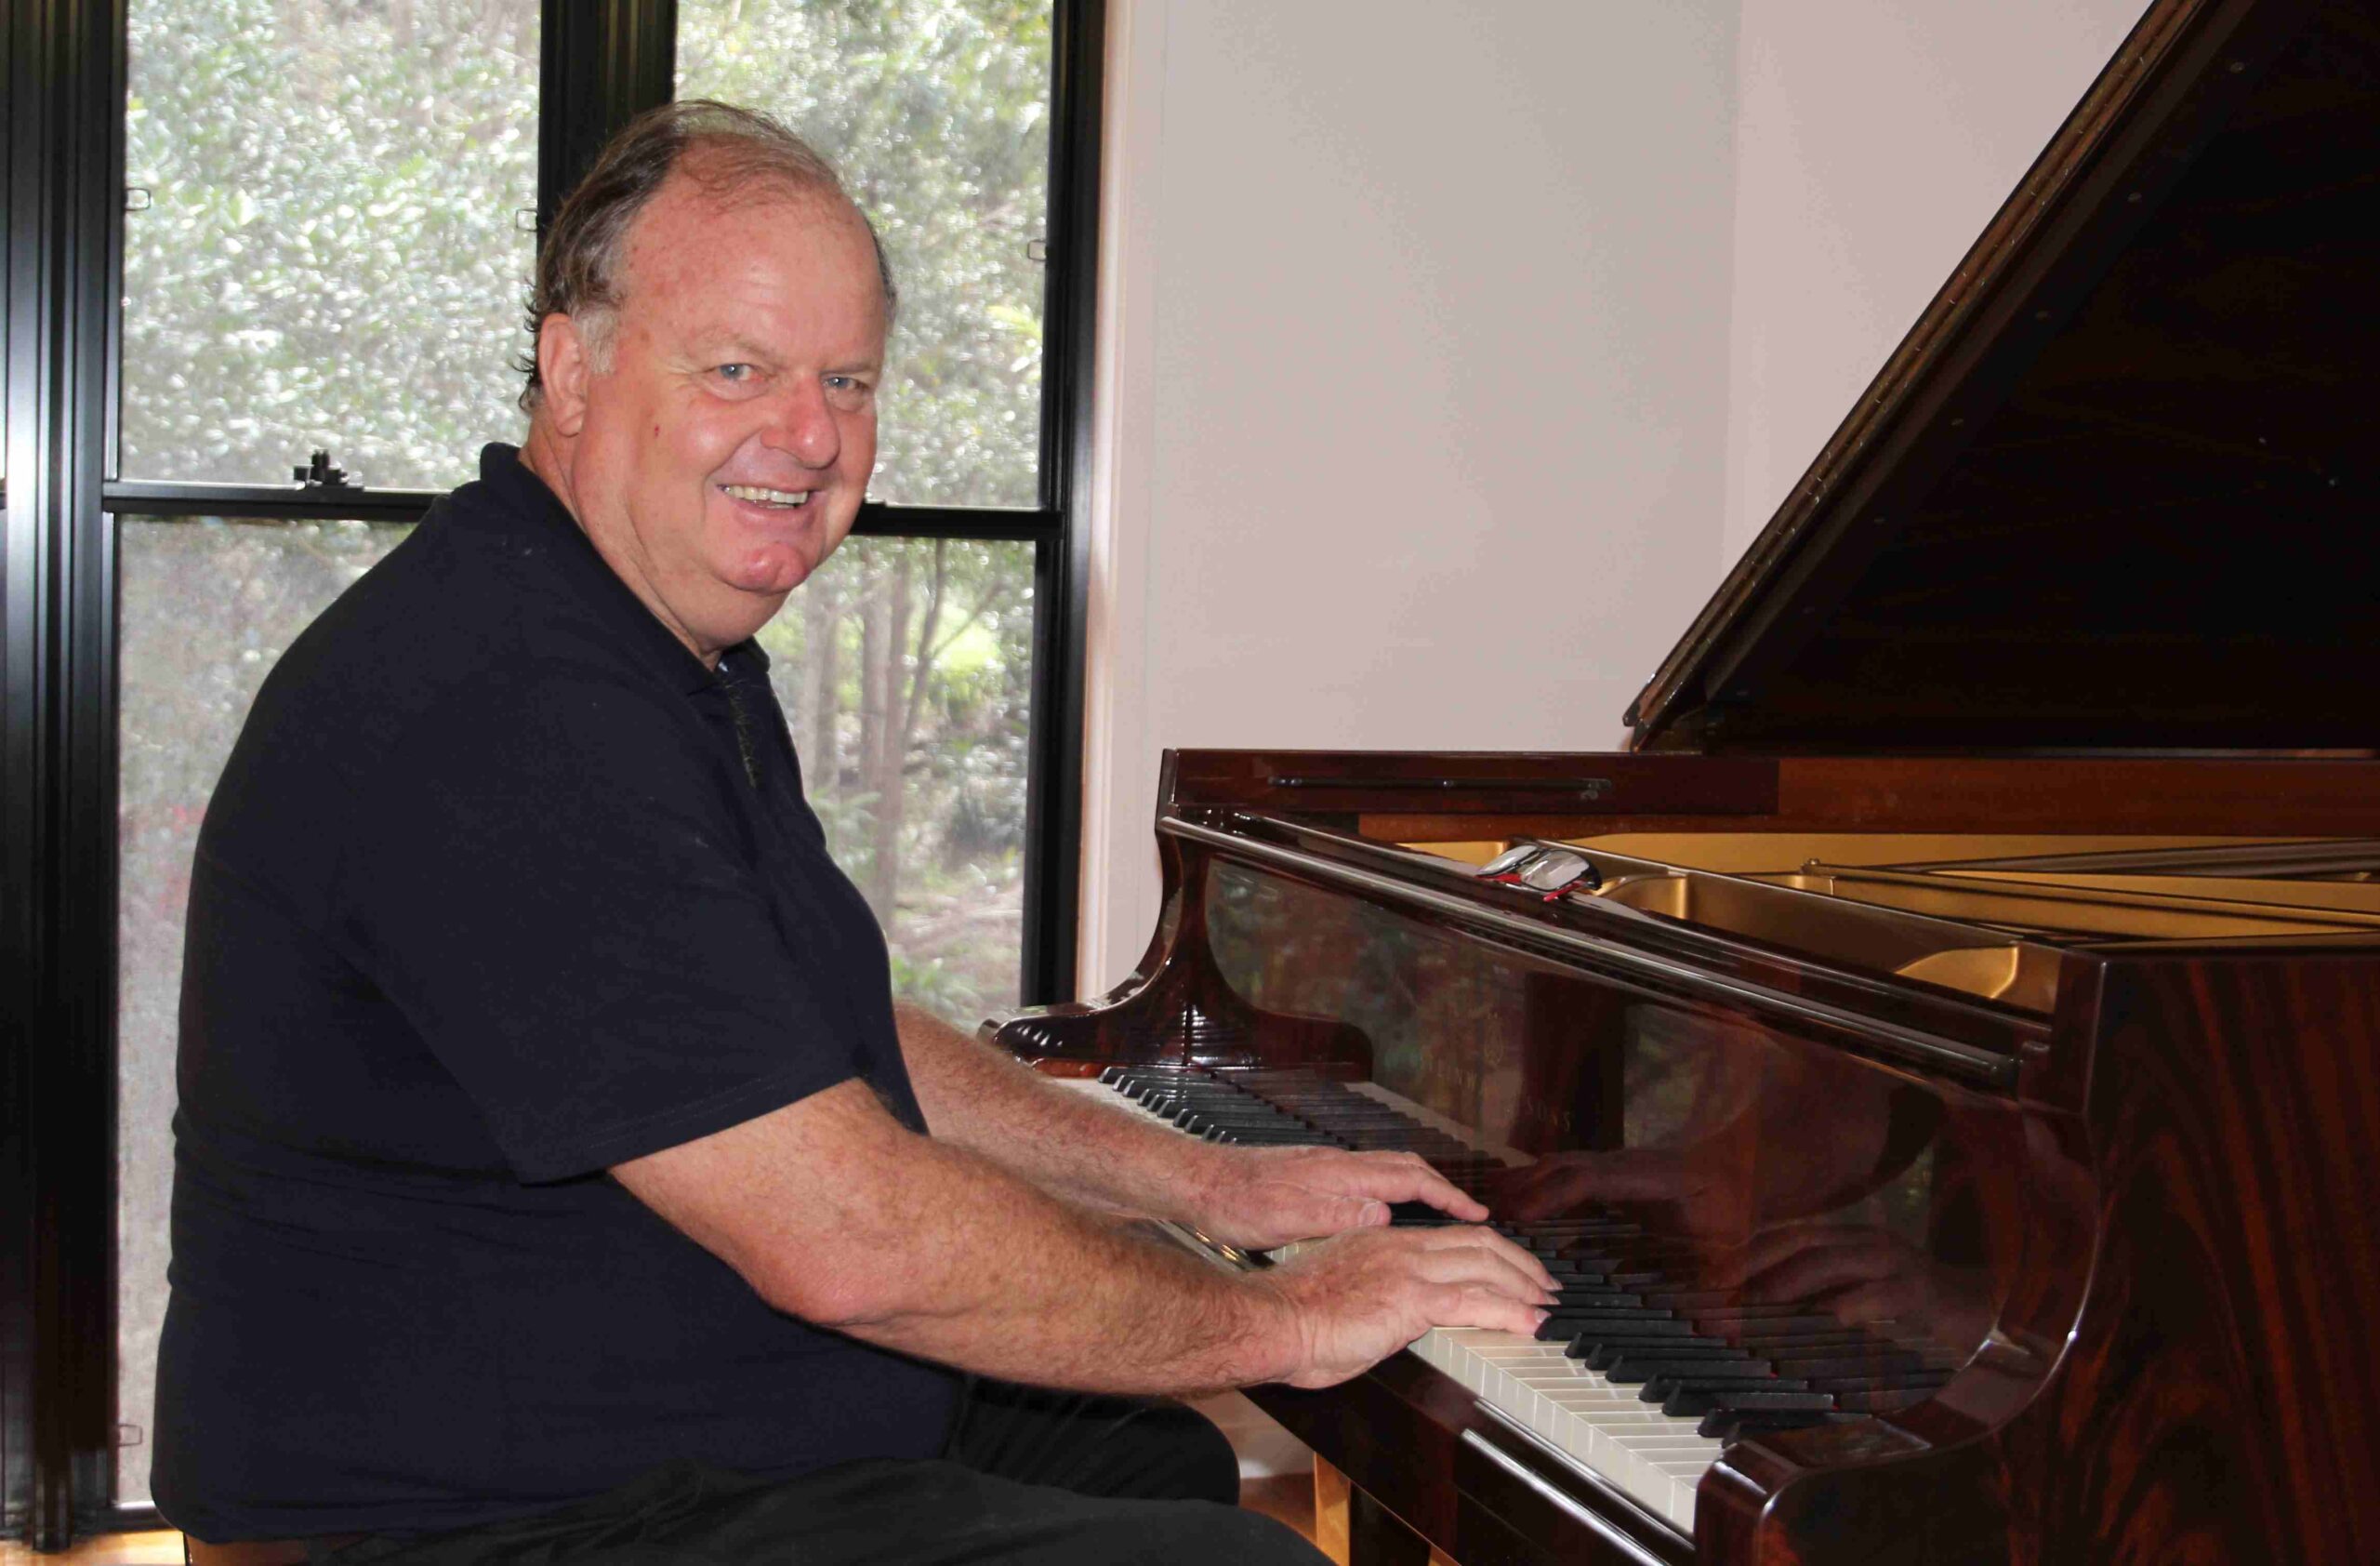 Amateur pianist invited to play at illustrious competition